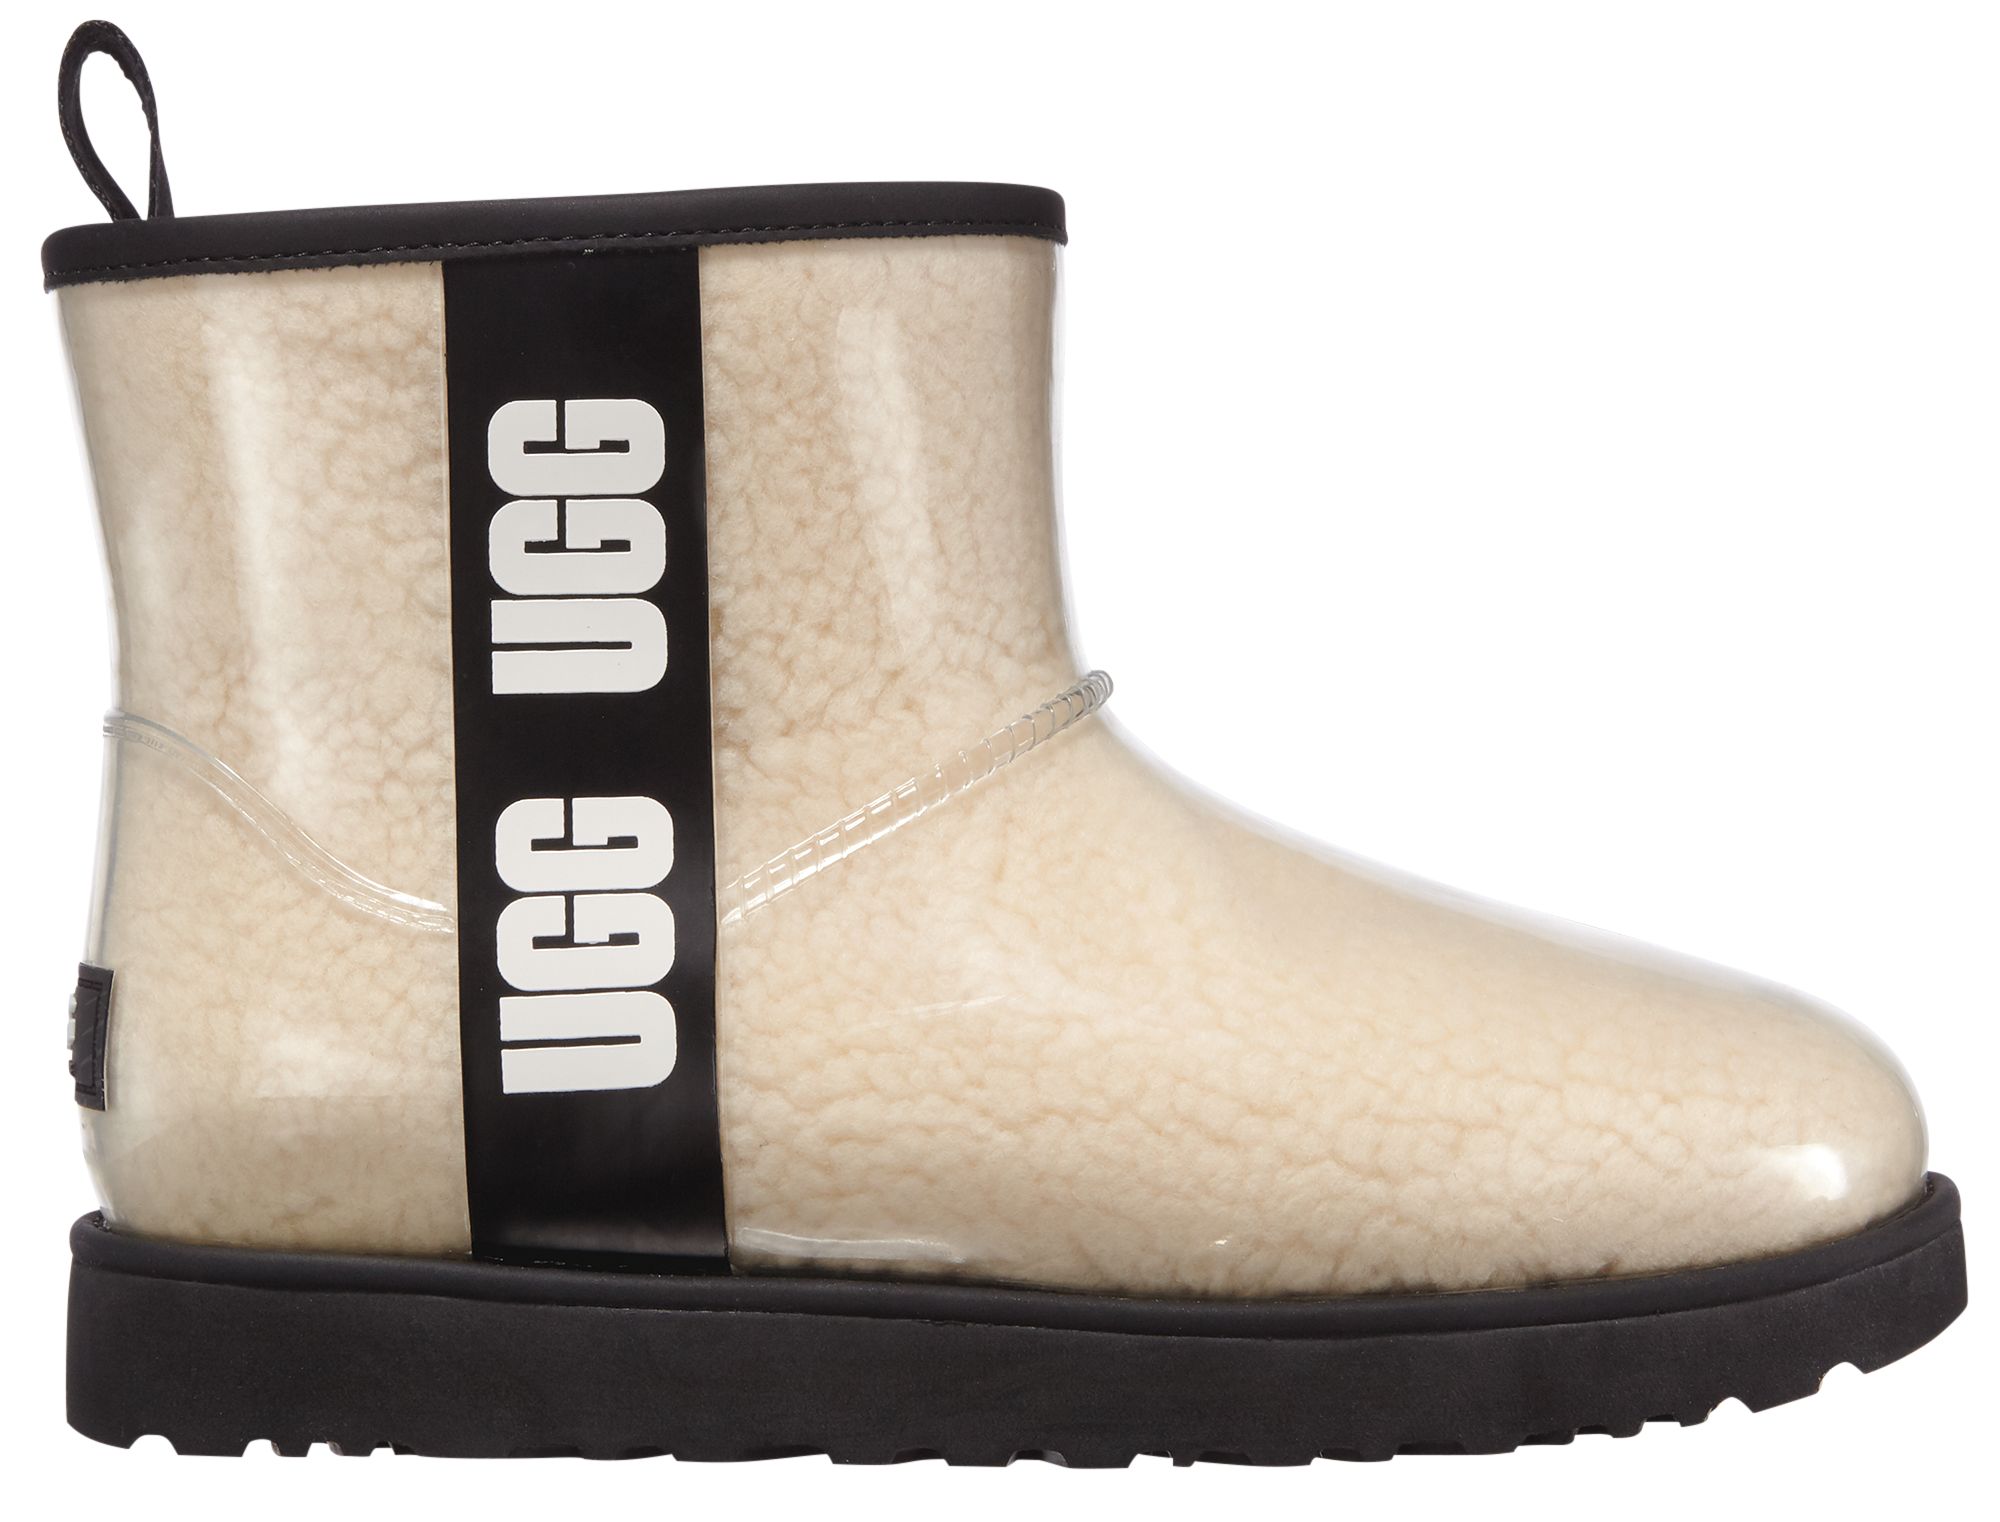 where to buy ugg boots near me